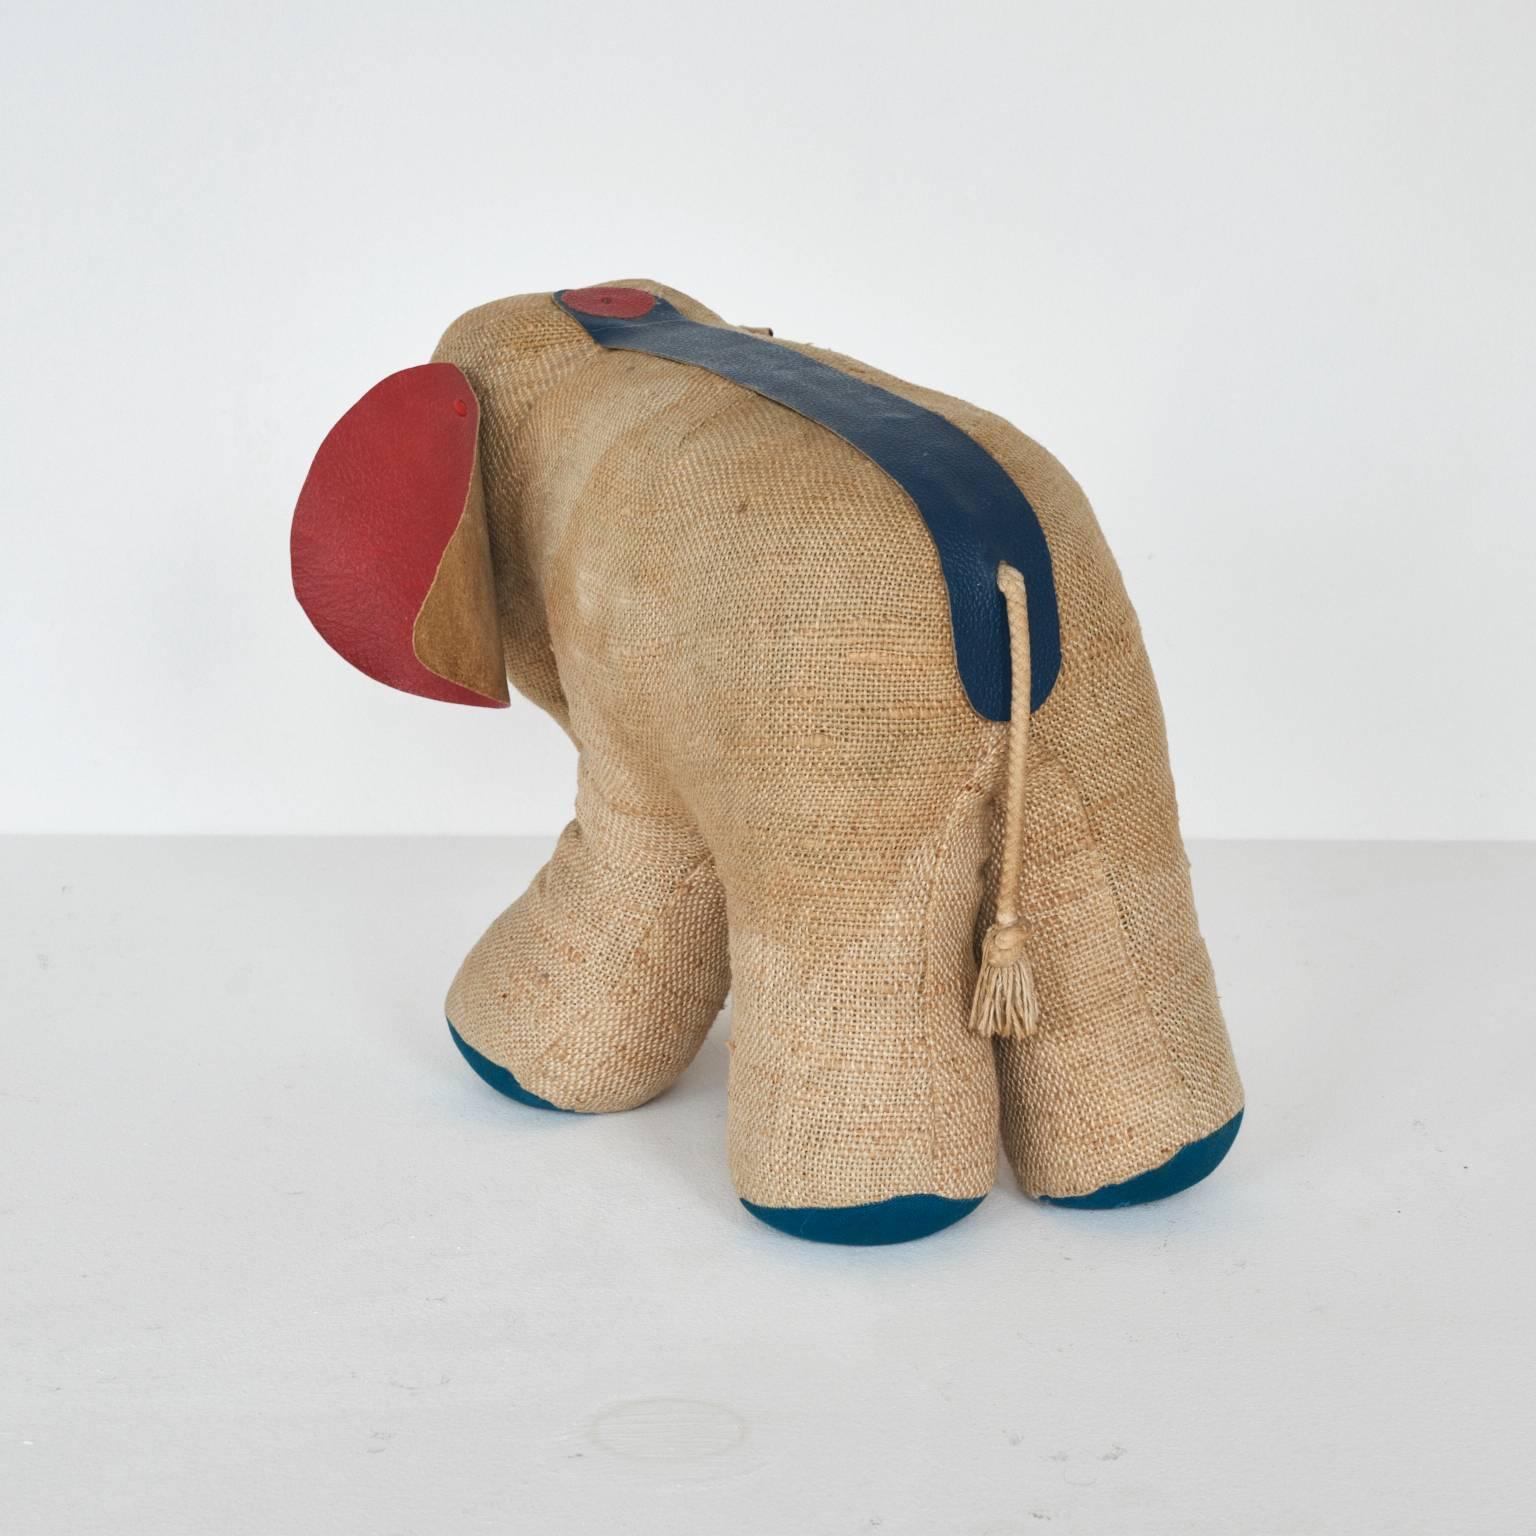 Elephant, Therapeutic toy created 1968 by Renate Müller in Sonneberg, pictured in the book “Renate Müller Toys and Design”, p.40. It is the bigger execution, in 1968 Renate Müller created two sizes for the elephant.